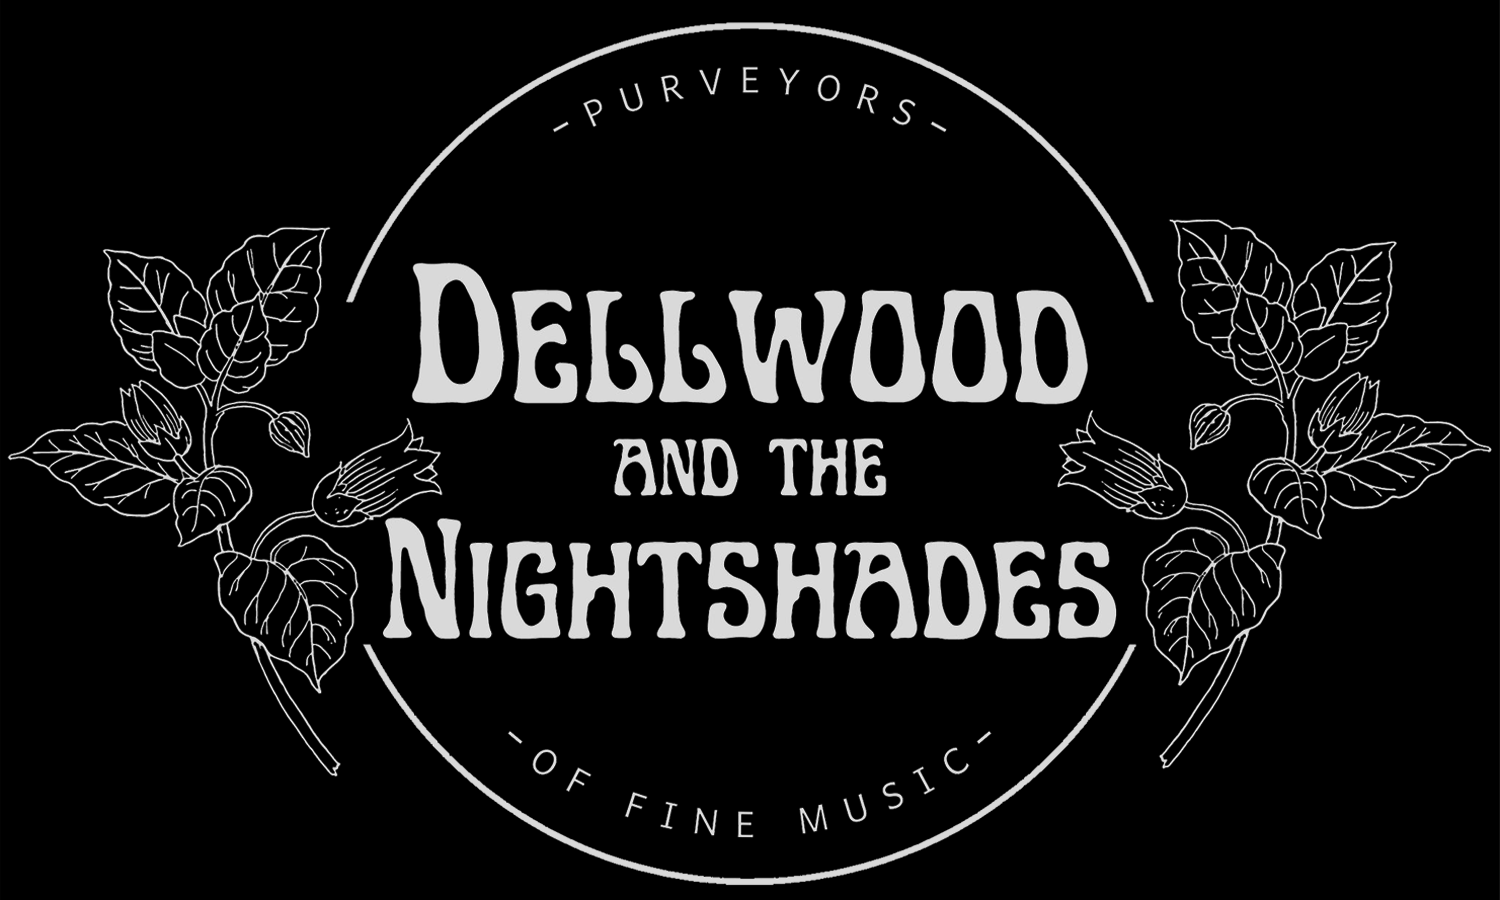 Dellwood and The Nightshades